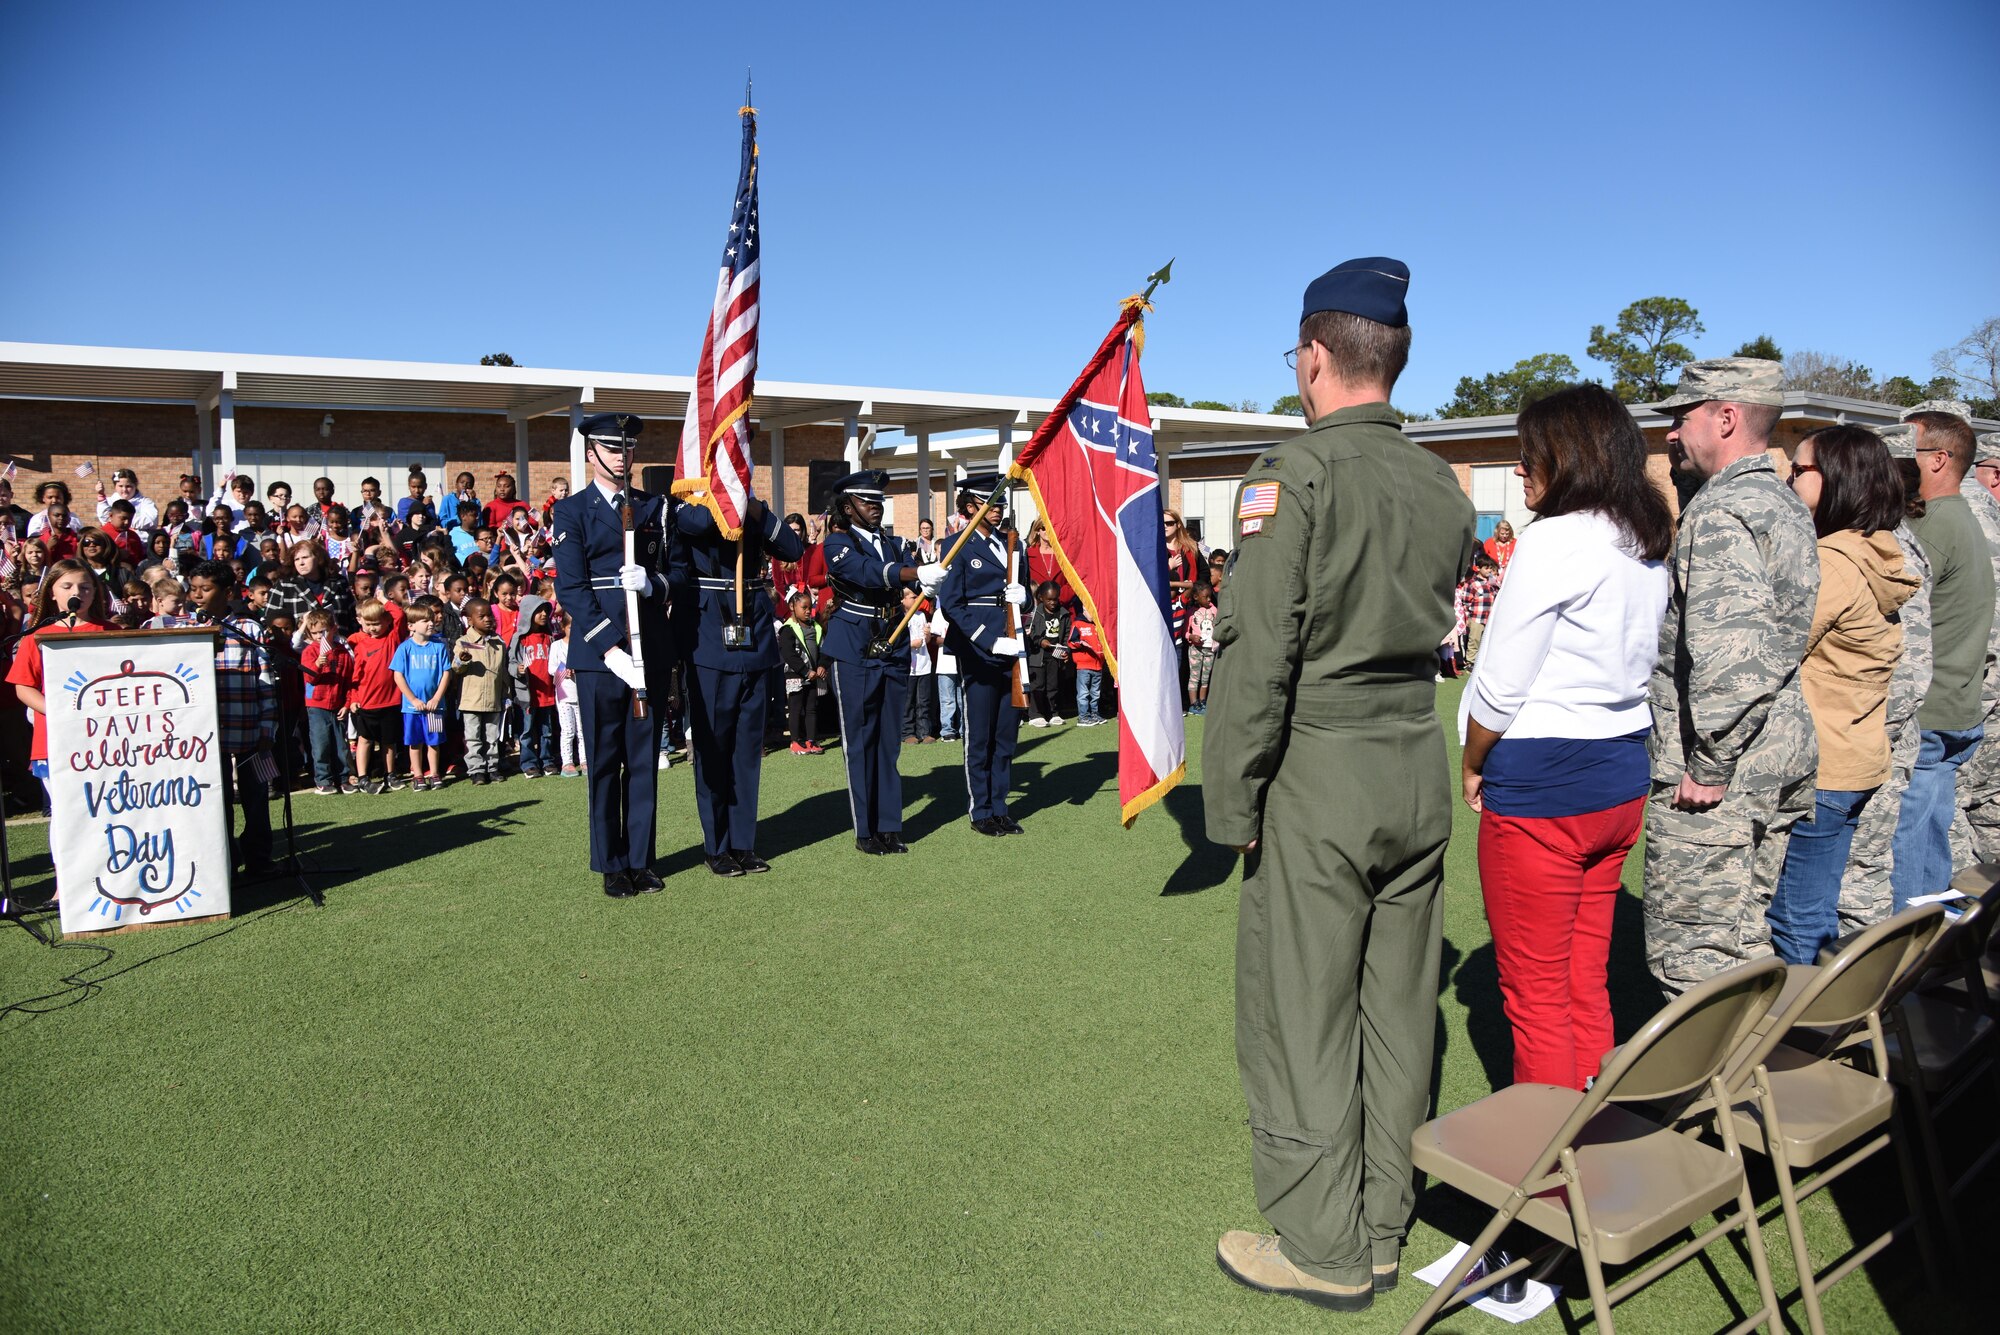 Col. C. Mike Smith, 81st Training Wing vice commander, and fellow audience members honor the flag during the Jeff Davis Elementary School Veterans Day celebration Nov. 10, 2017, in Biloxi, Mississippi. During the event, students recited the Pledge of Allegiance and sang several patriotic songs. Keesler Air Force Base leadership, honor guardsmen and base personnel attended the event. (U.S. Air Force photo by Kemberly Groue)